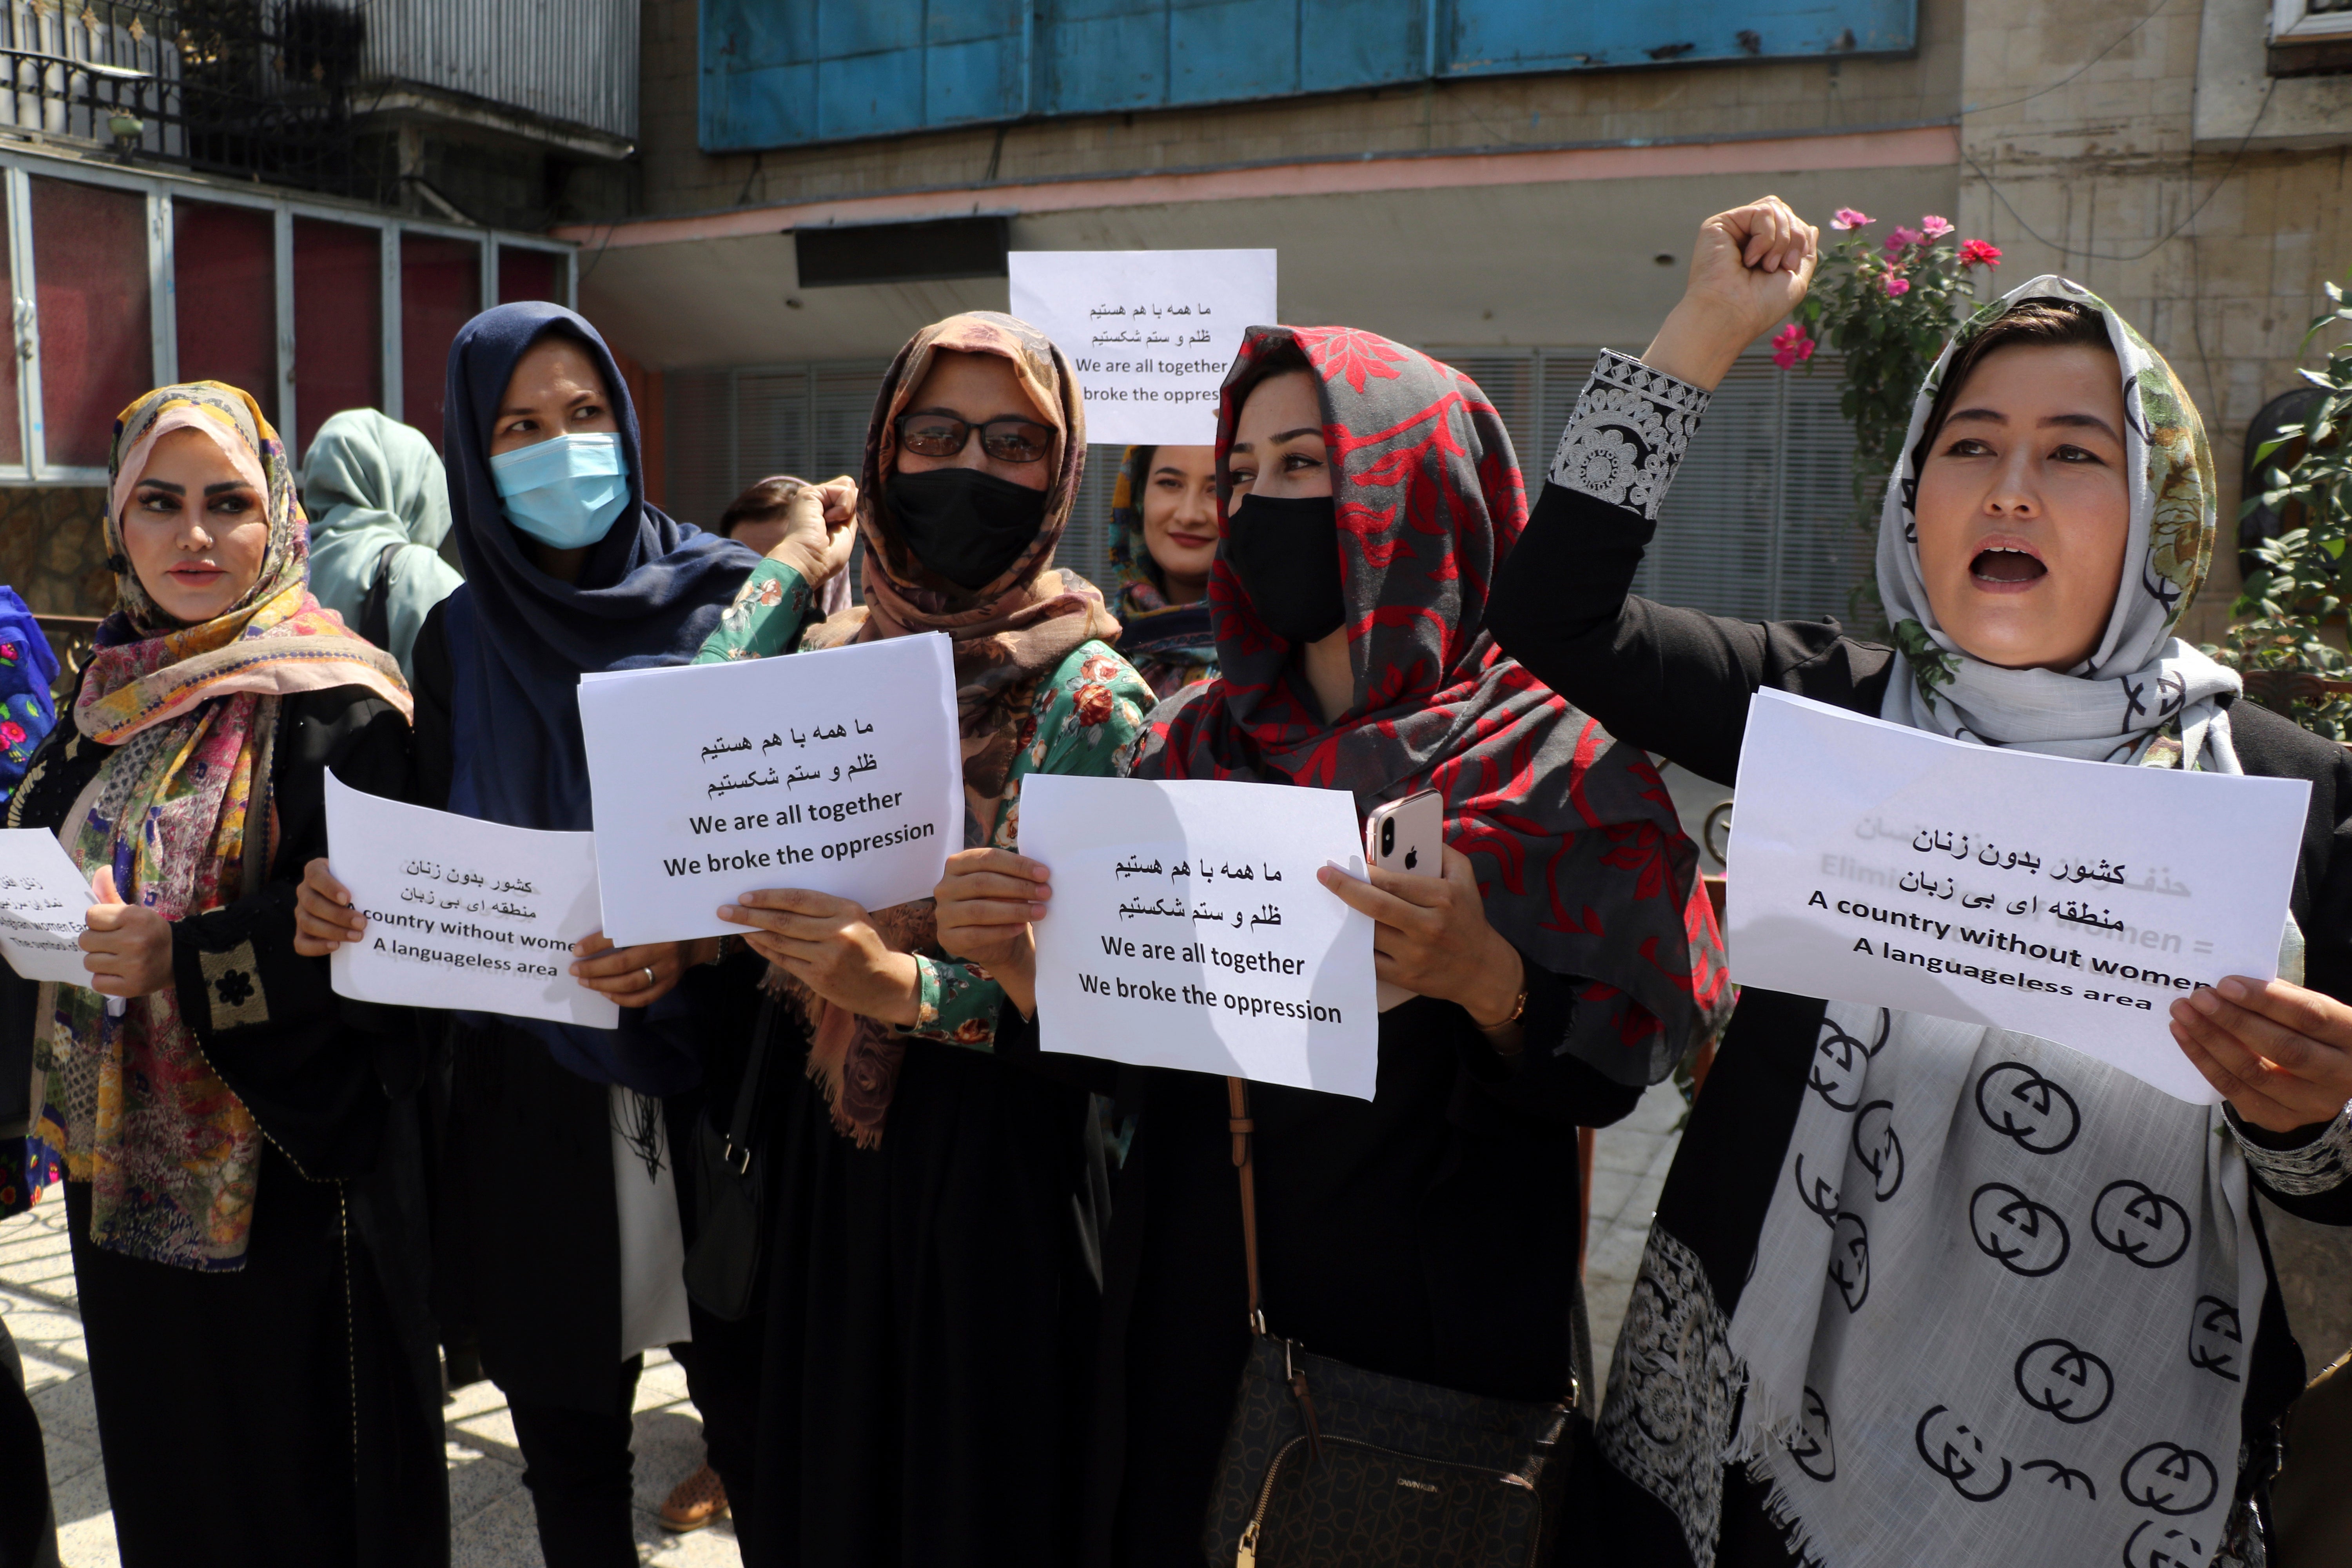 Women in Kabul have been protesting for two days to demand that the Taliban respects their rights